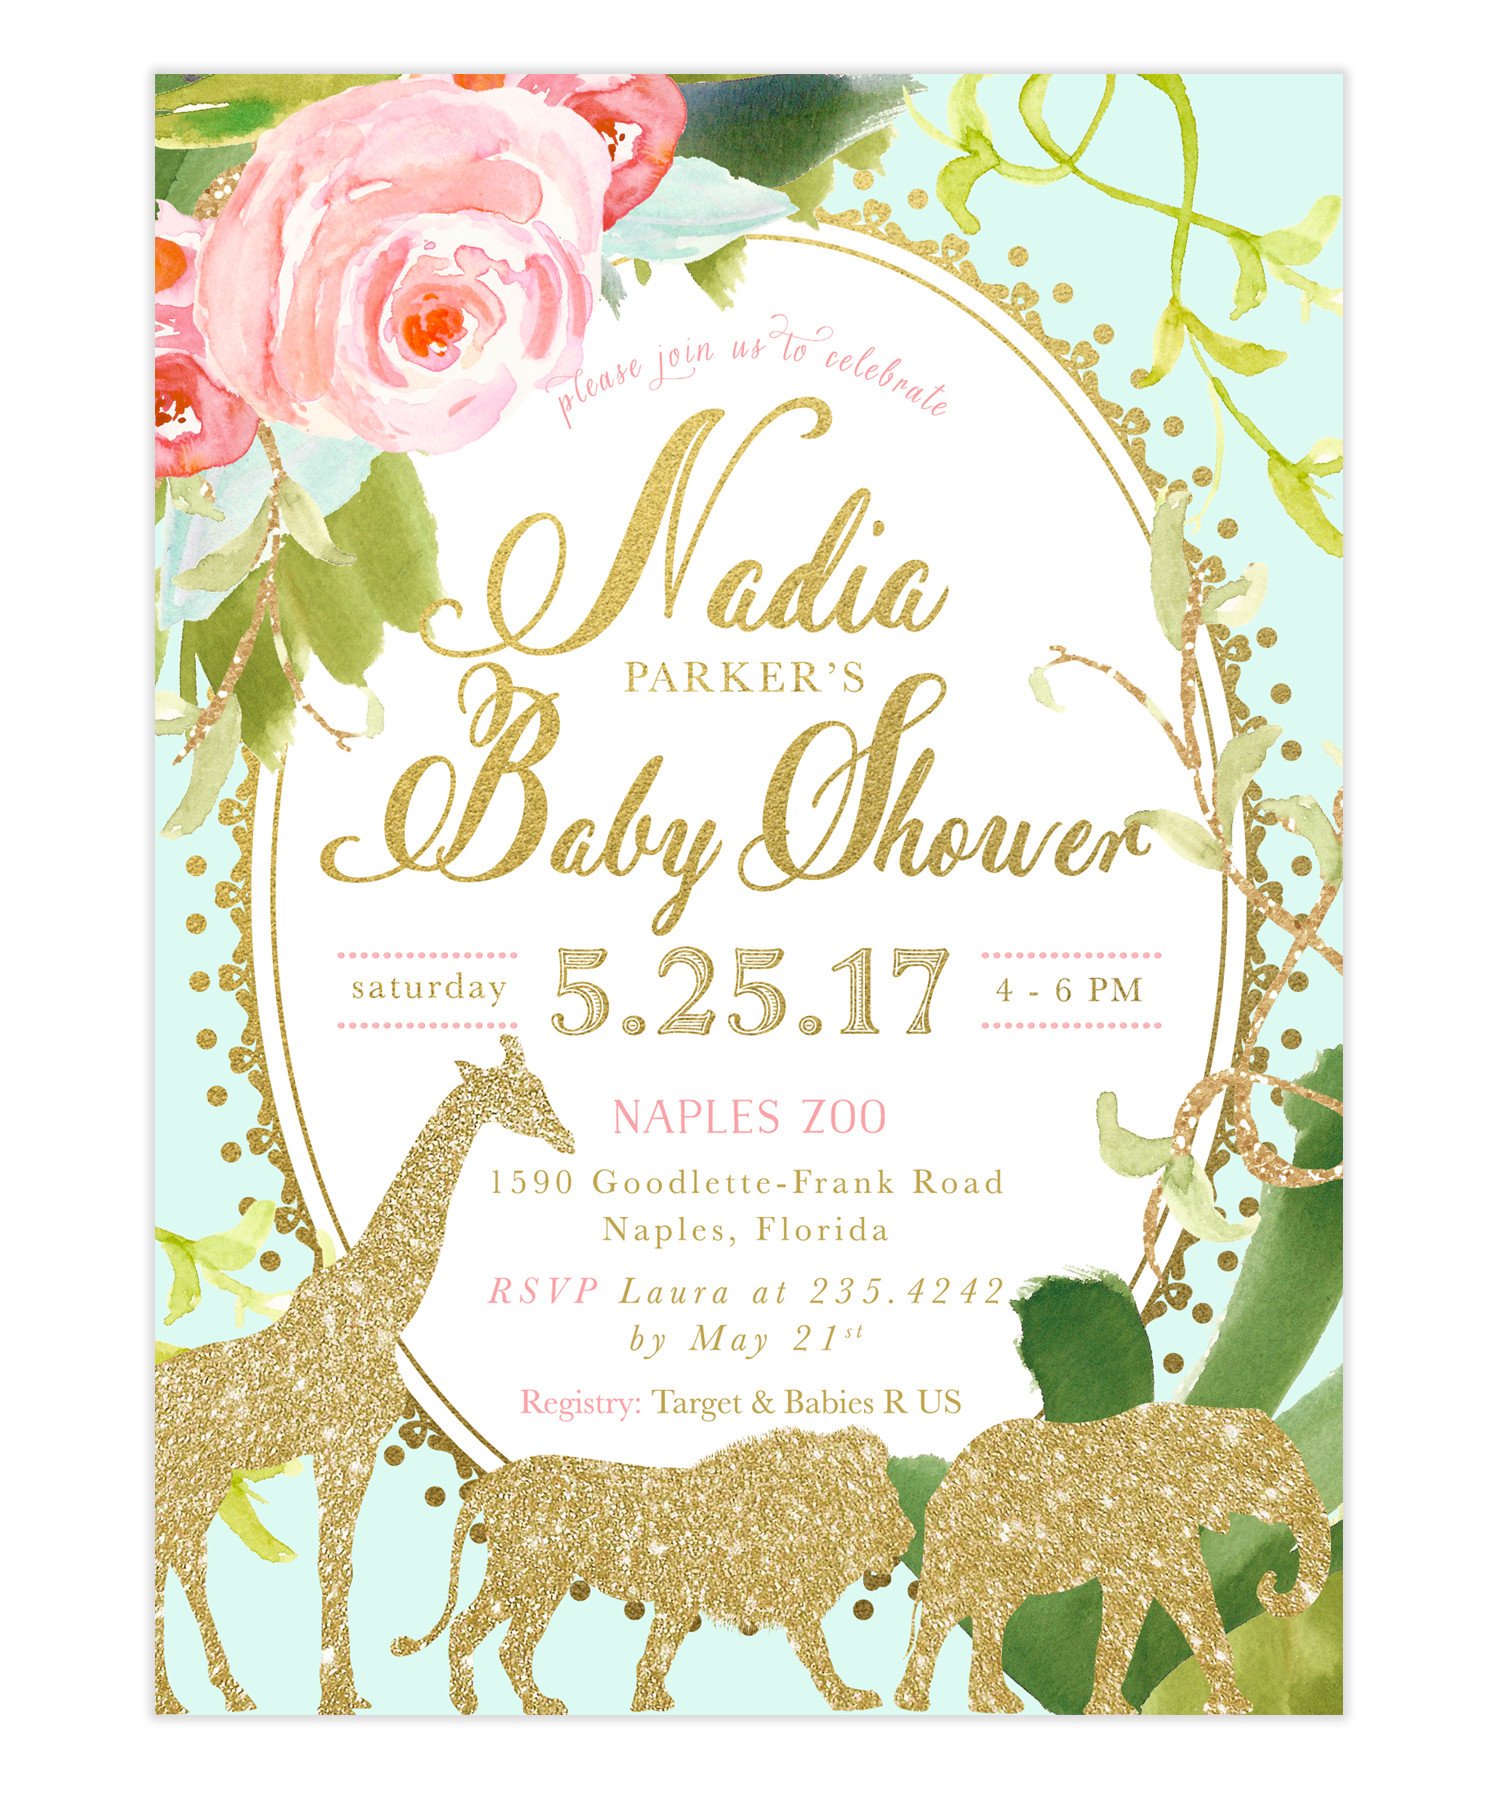 Full Size of Baby Shower:free Printable Baby Shower Games Elegant Baby Shower Baby Shower Centerpiece Ideas For Boys Nursery For Girls Homemade Baby Shower Decorations Unique Baby Shower Themes Nautical Baby Shower Invitations For Boys Printable Baby Shower Invitations For Girl